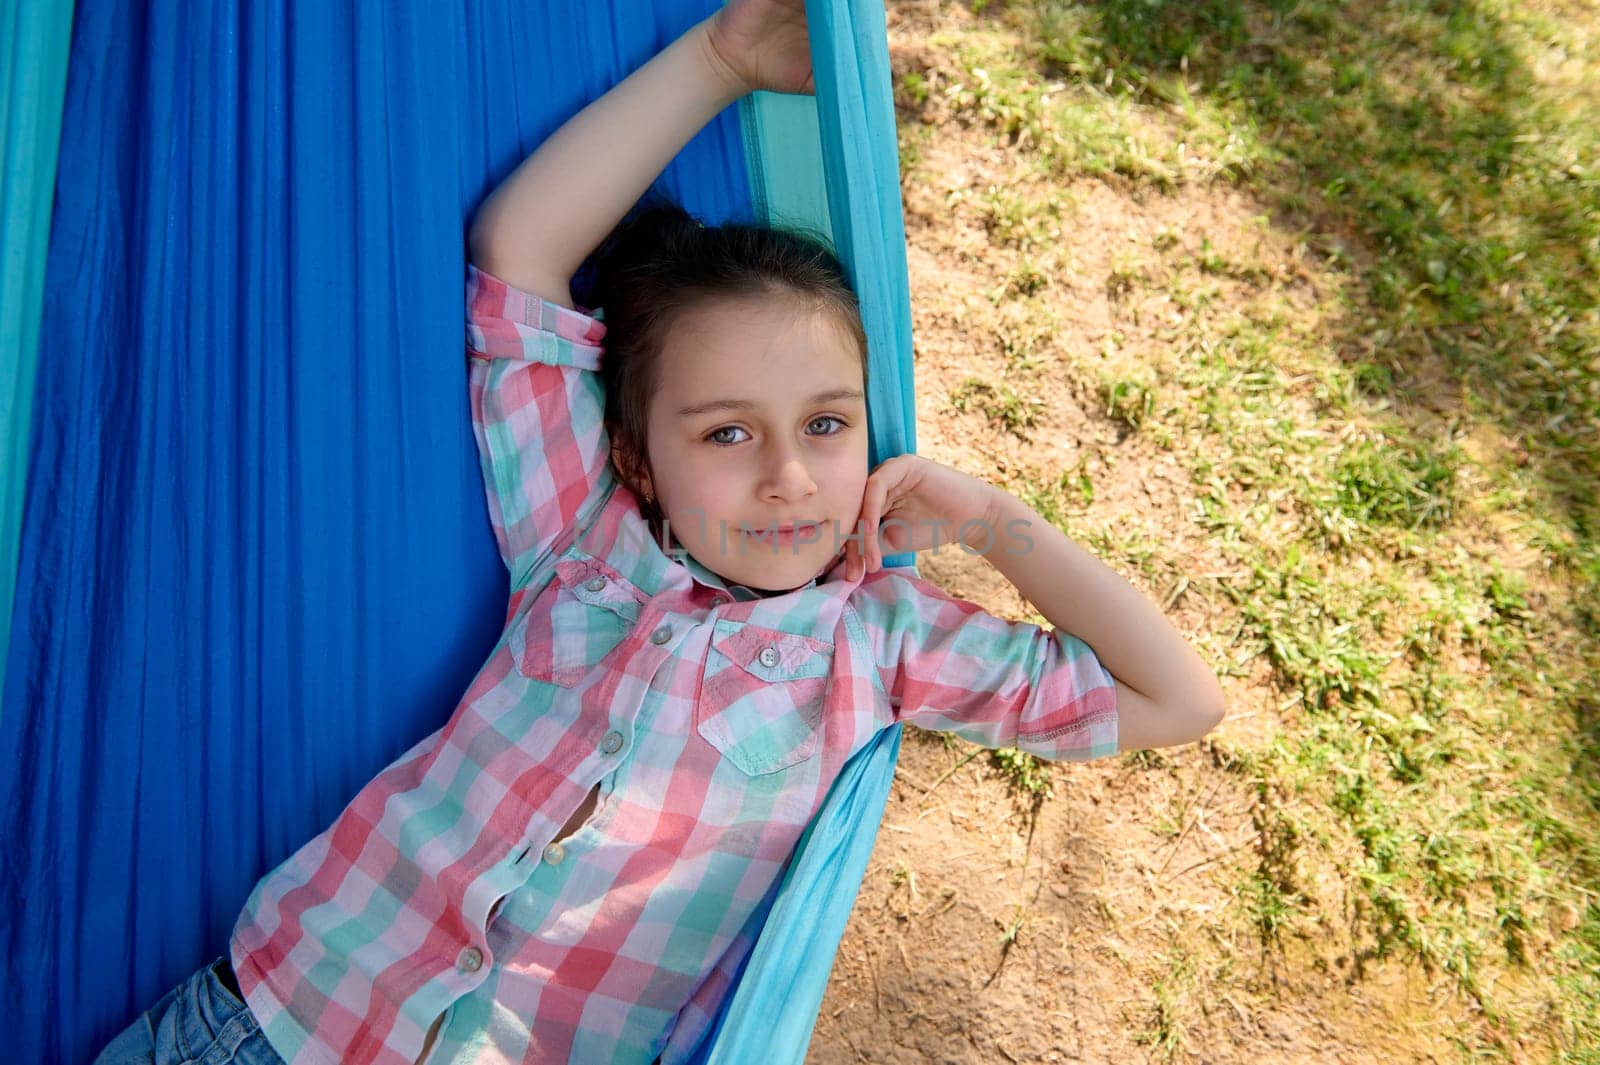 Adorable little child girl smiles looking at camera, relaxing, lying on a blue hammock in the backyard or summer camp, enjoying her weekend outdoors. People. Kids. Leisure activity. Lifestyle.